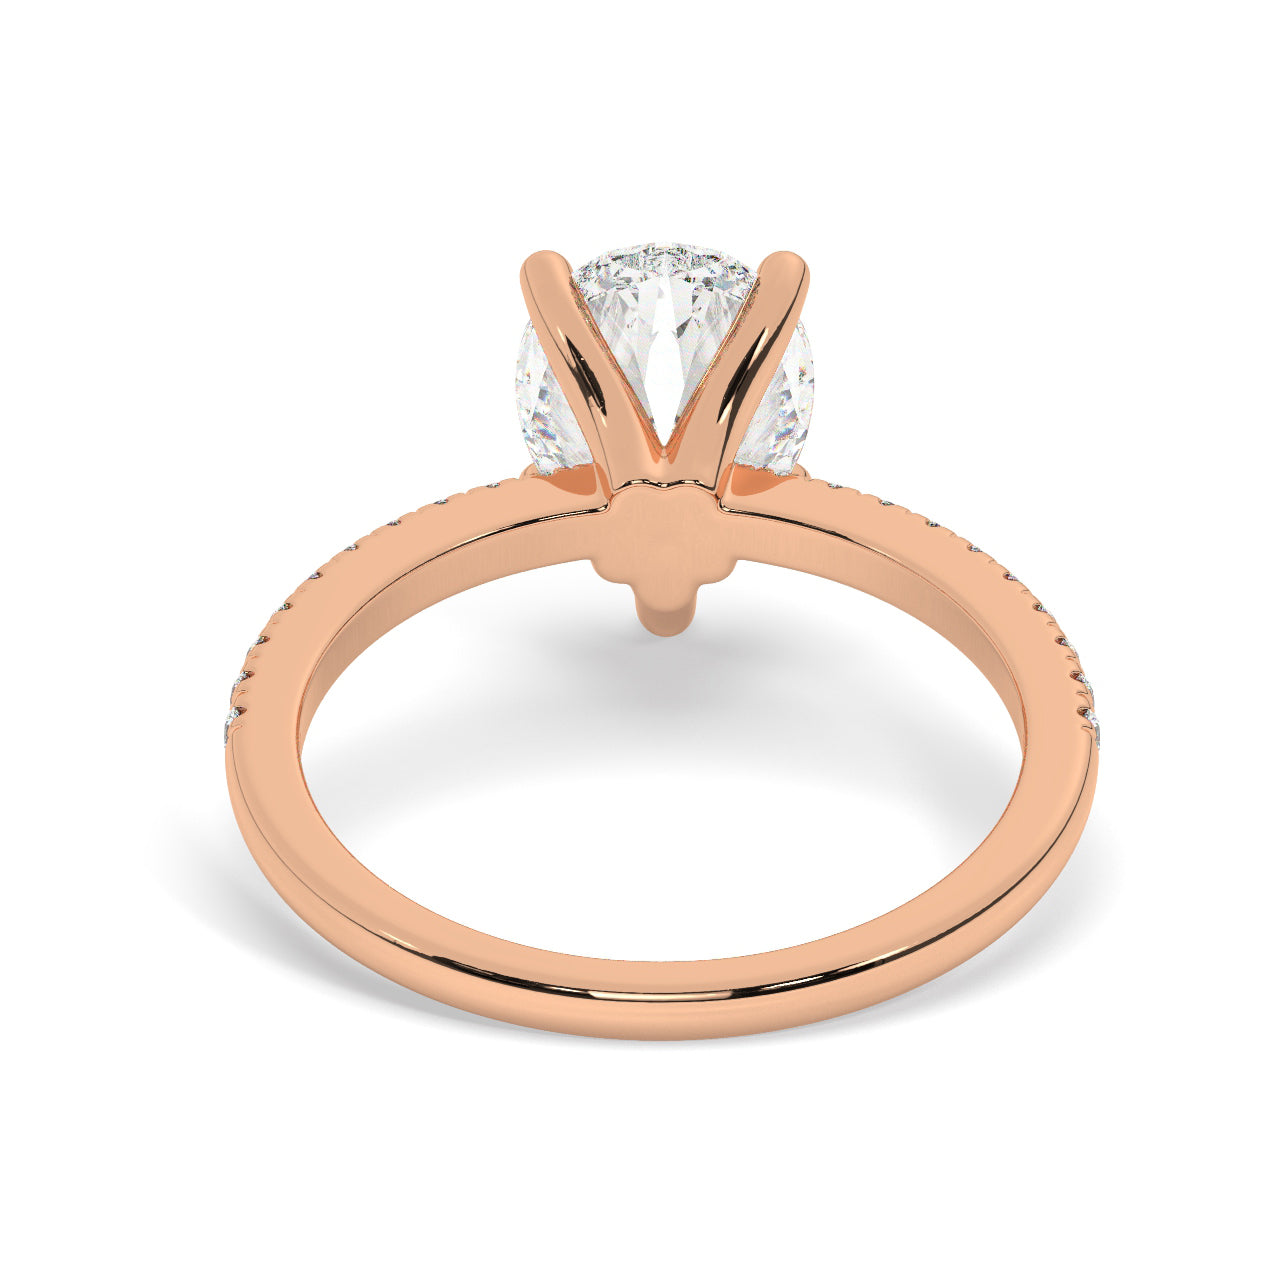 Pear Cut Lab Diamond Ring with a Pave Band on a Rose Gold Setting - Back View